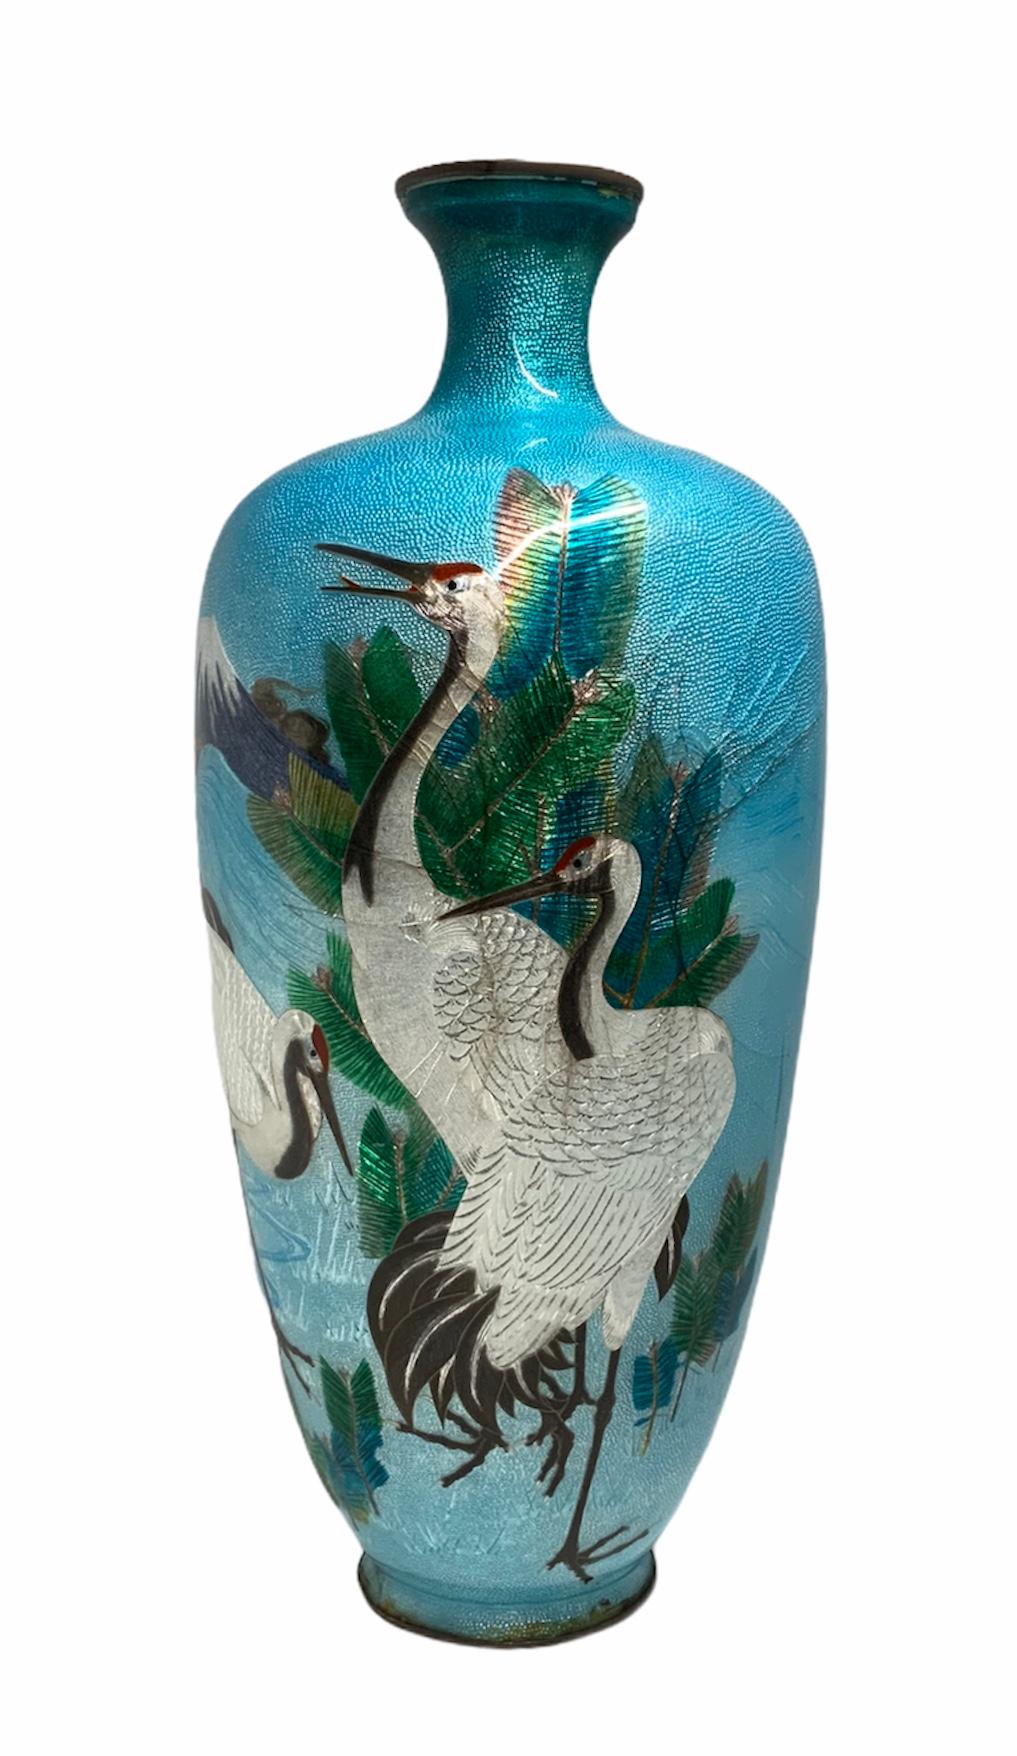 This is a cloisonné foil metal vase depicting a continuous scenes around it of three large white cranes, a volcano and some green leaves in a turquoise background. Under the base there is some Japanese mark.